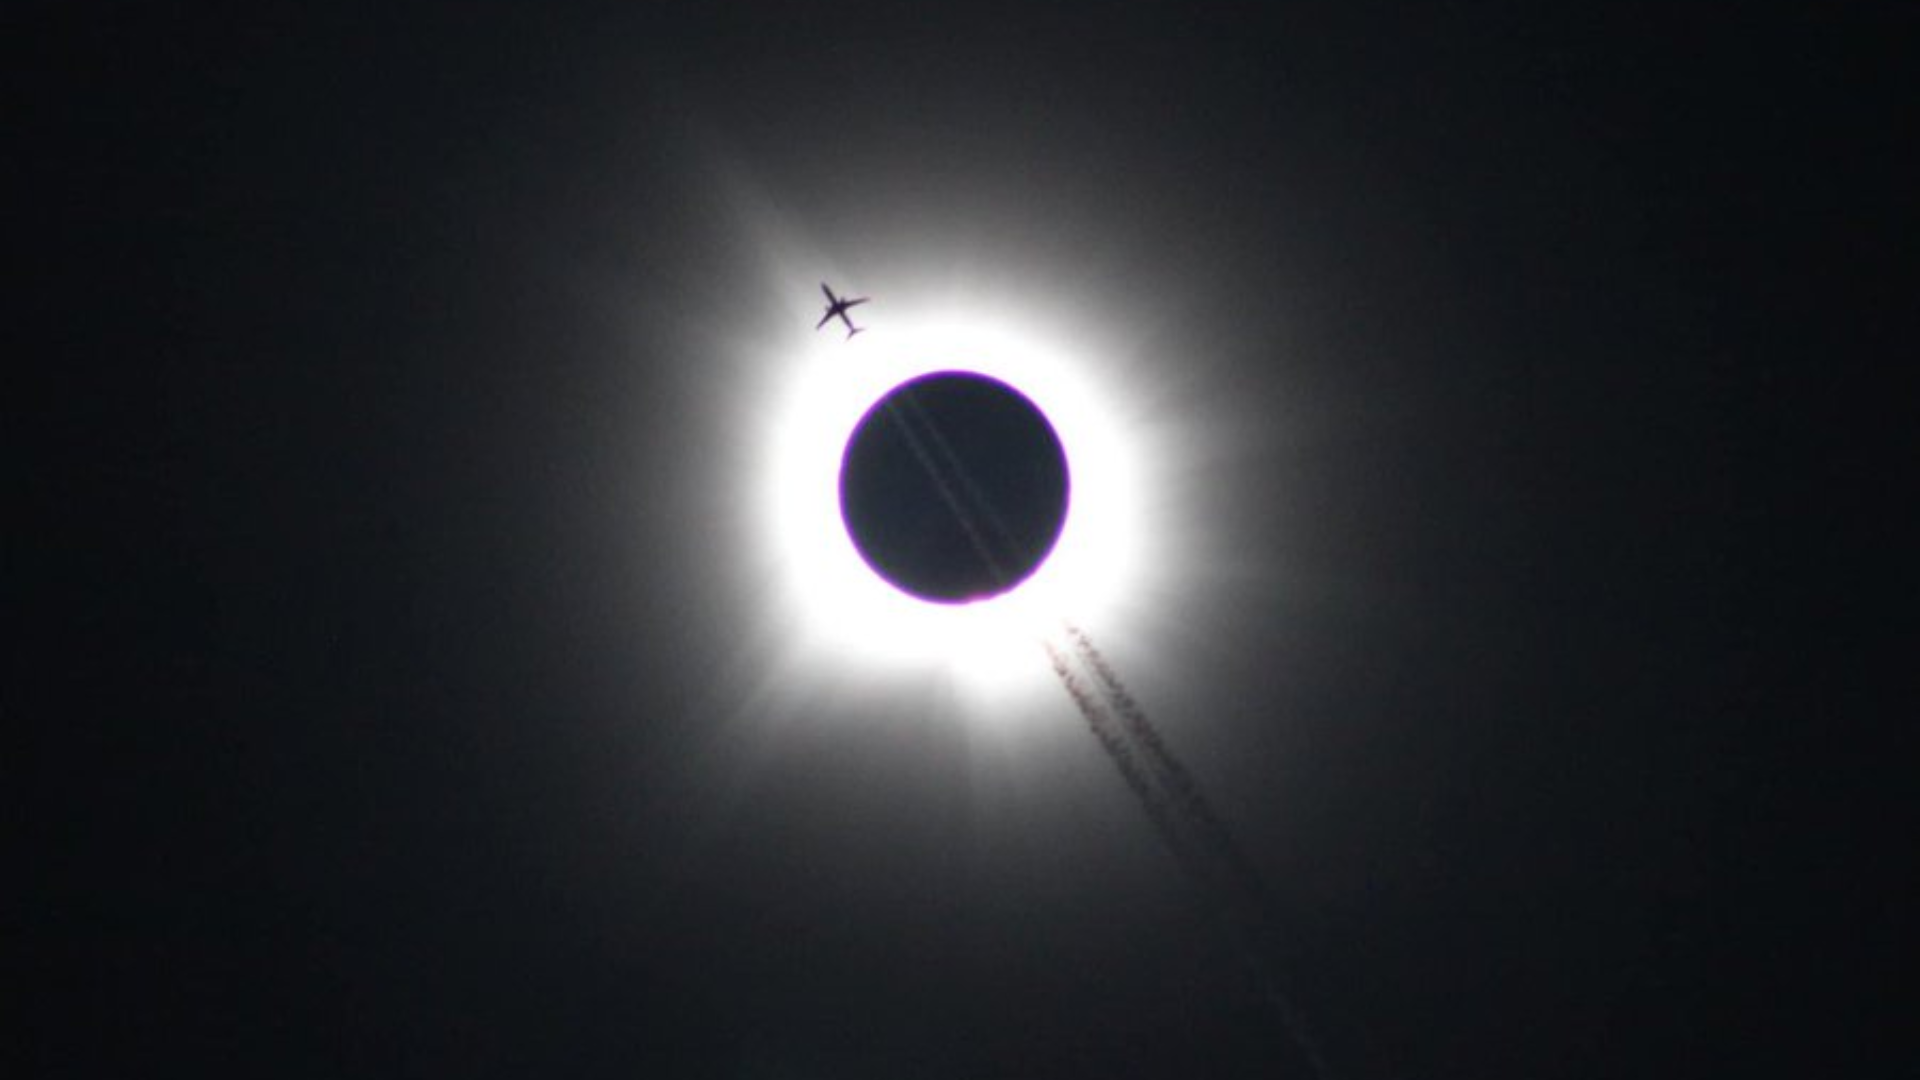 Total Solar Eclipse Photo with Passing Plane Goes Viral